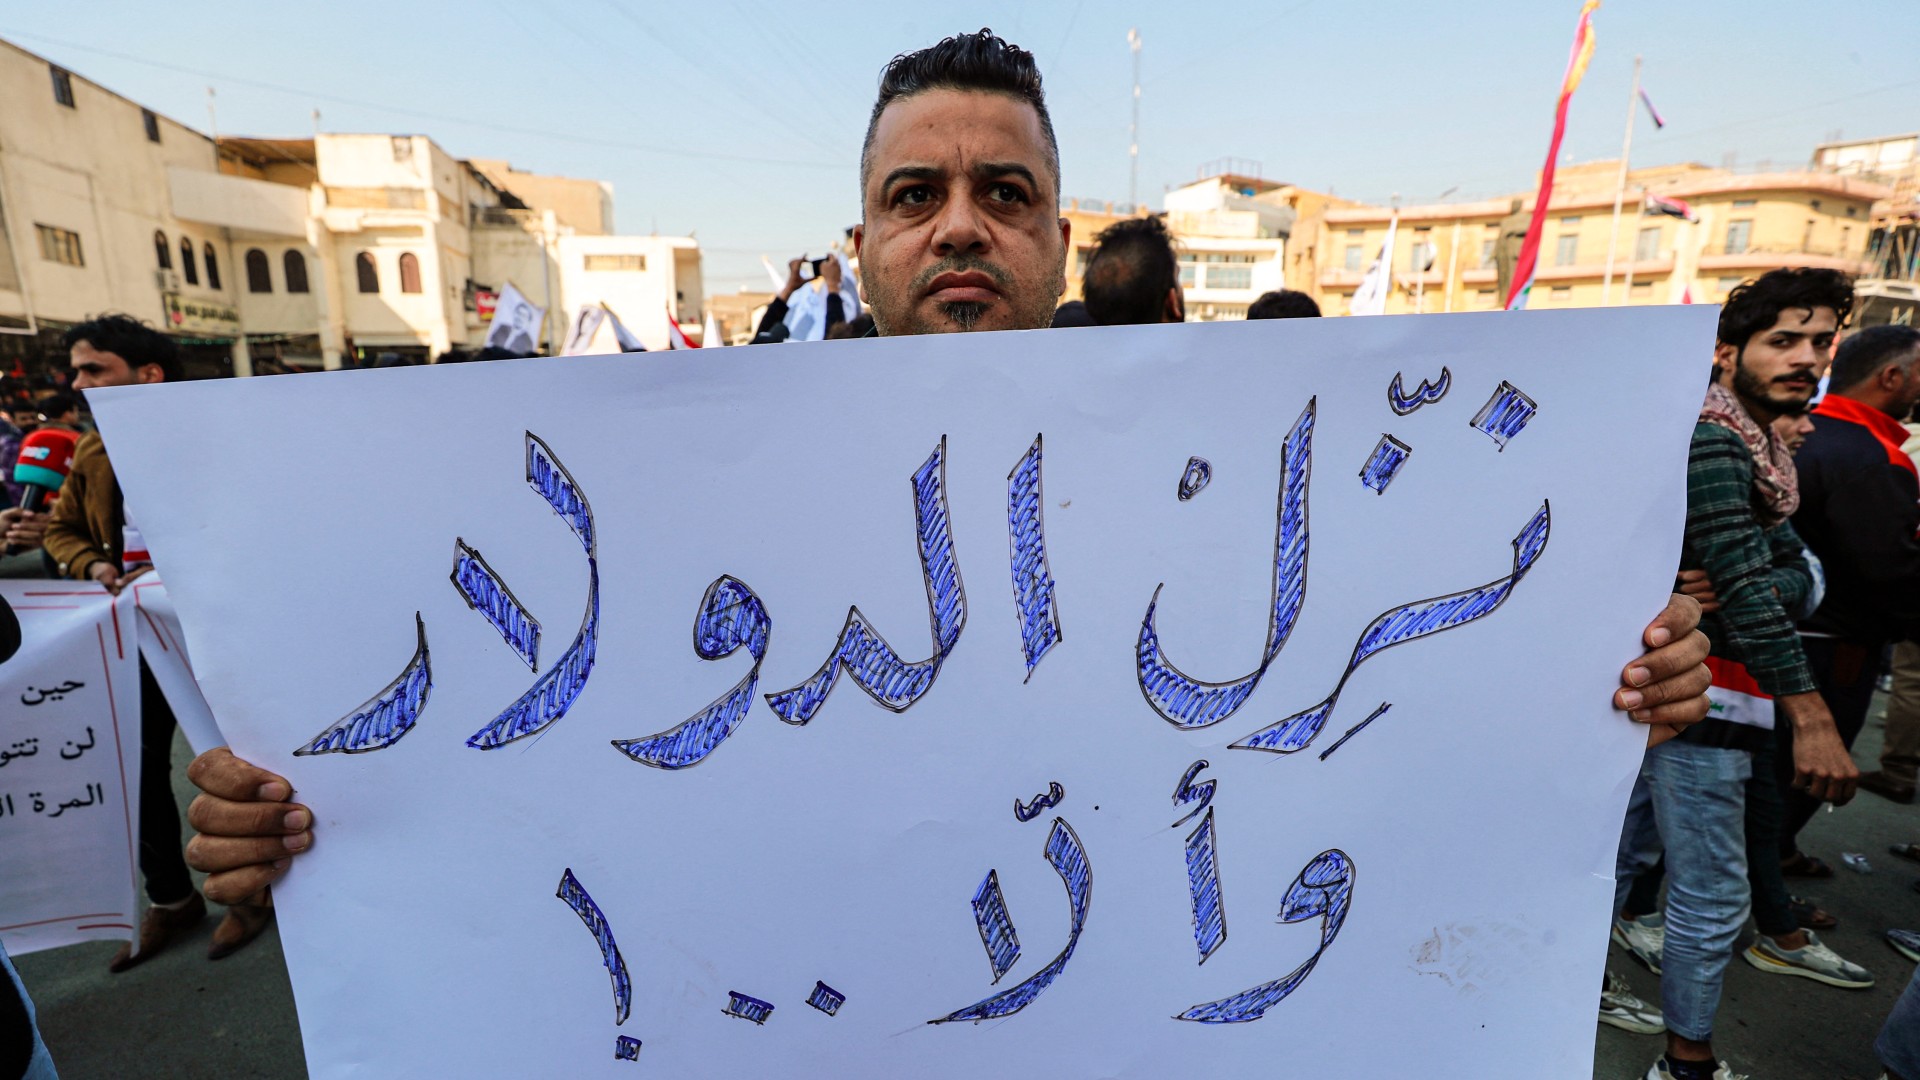 A man stands holding a sign reading "depreciate the rate of the dollar, or else..!" during a protest outside the Central Bank in Baghdad (AFP)